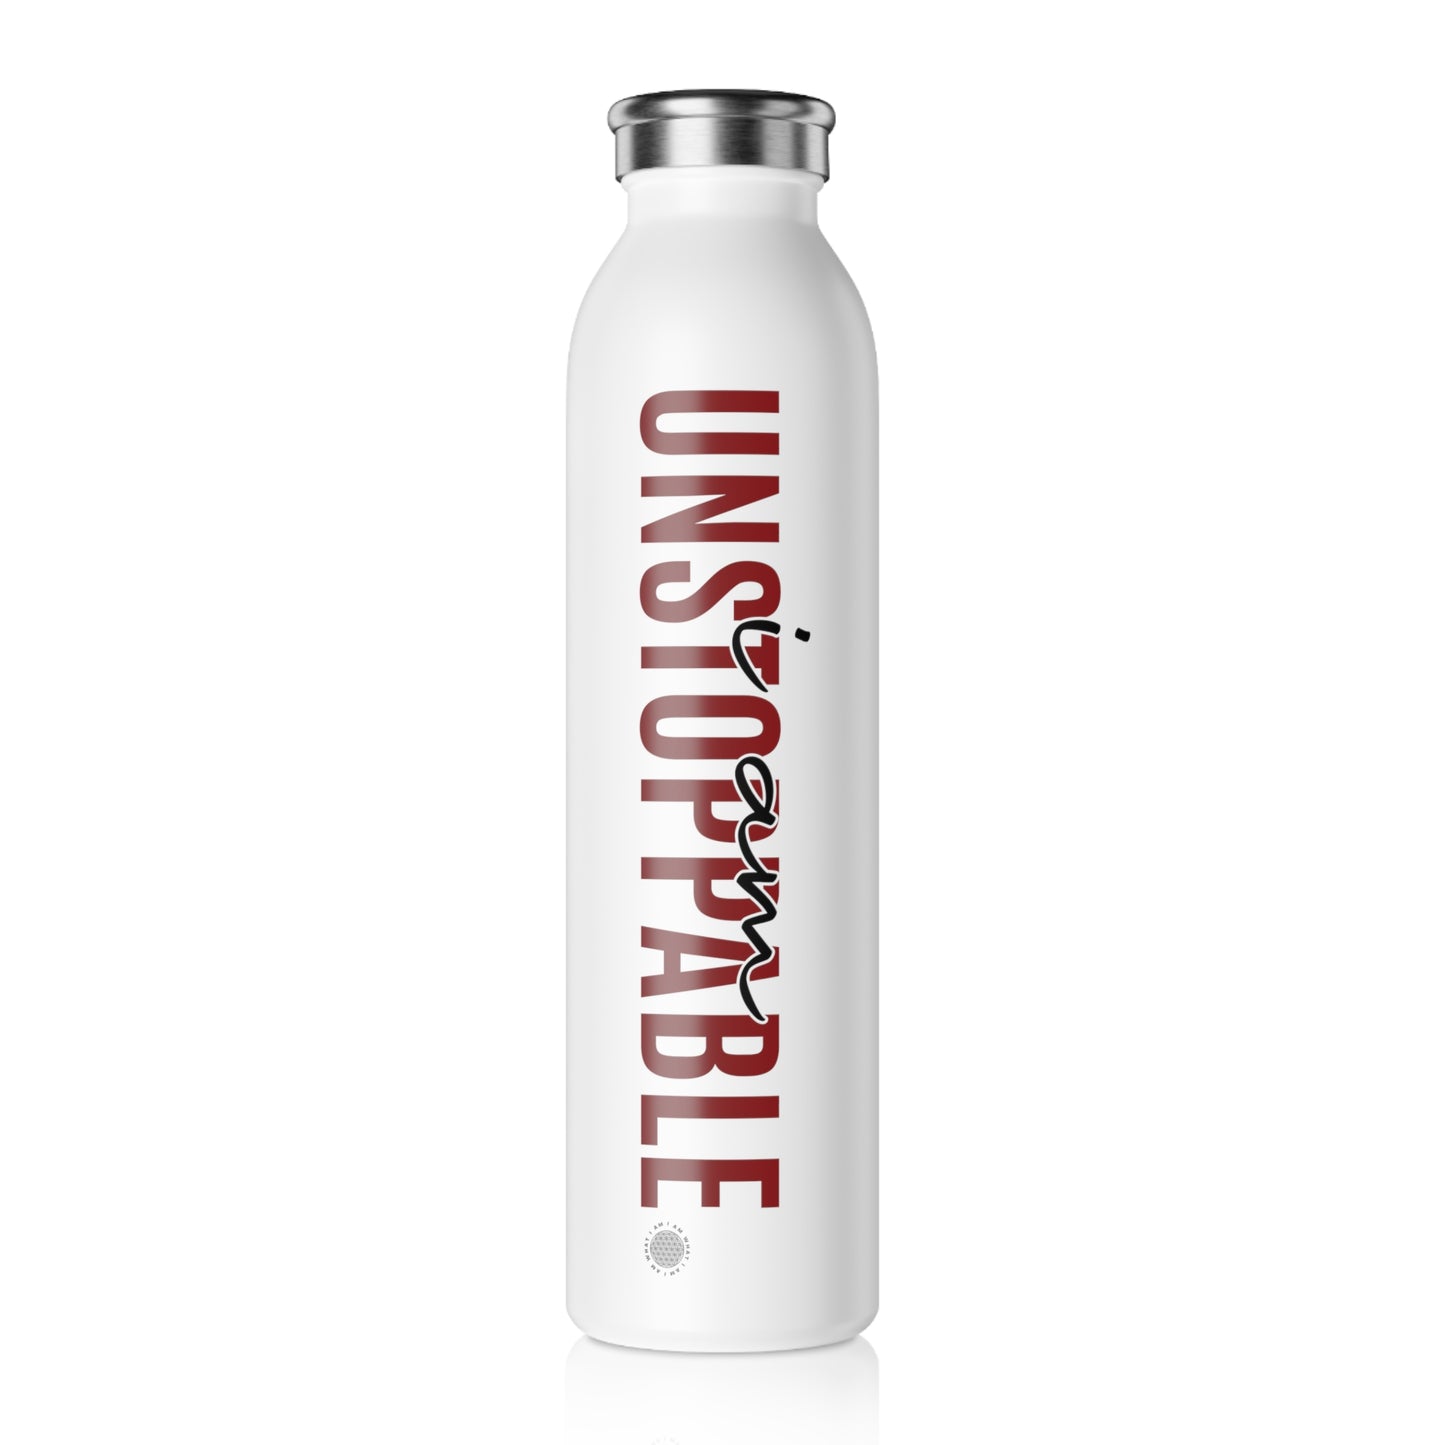 Our I Am Unstoppable affirmation water bottle is perfect for reminding you that nothing will get in your way. Motivational quotes are great to keep you on track. This personalized water bottle was designed to become a creator’s favorite canvas of expression.